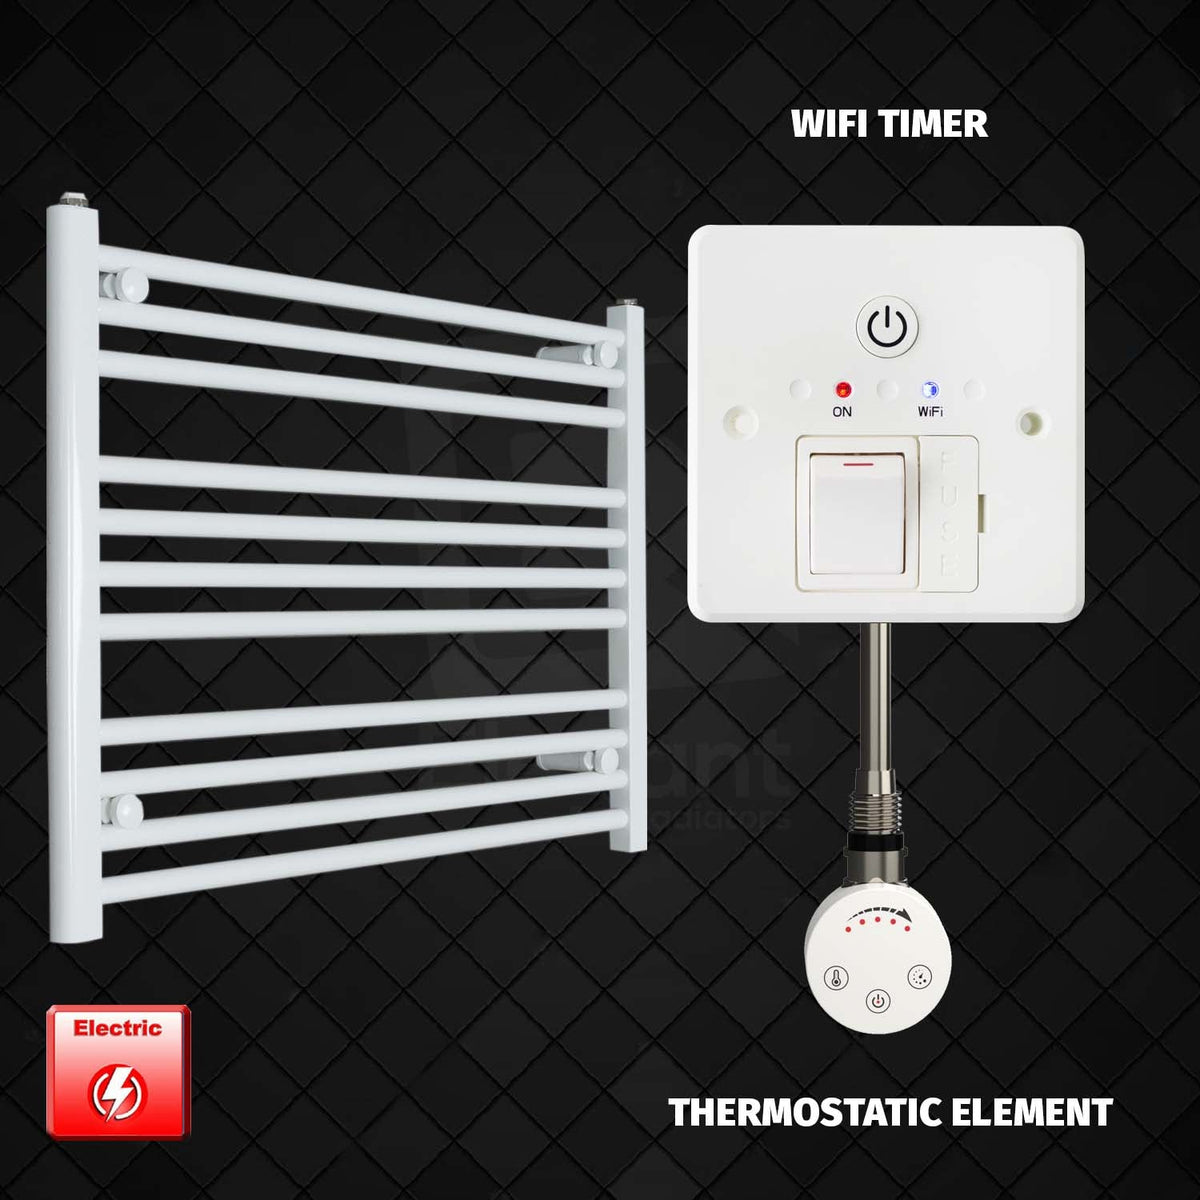 600 mm High 750 mm Wide Pre-Filled Electric Heated Towel Radiator White HTR SMR Thermostatic element Wifi timer